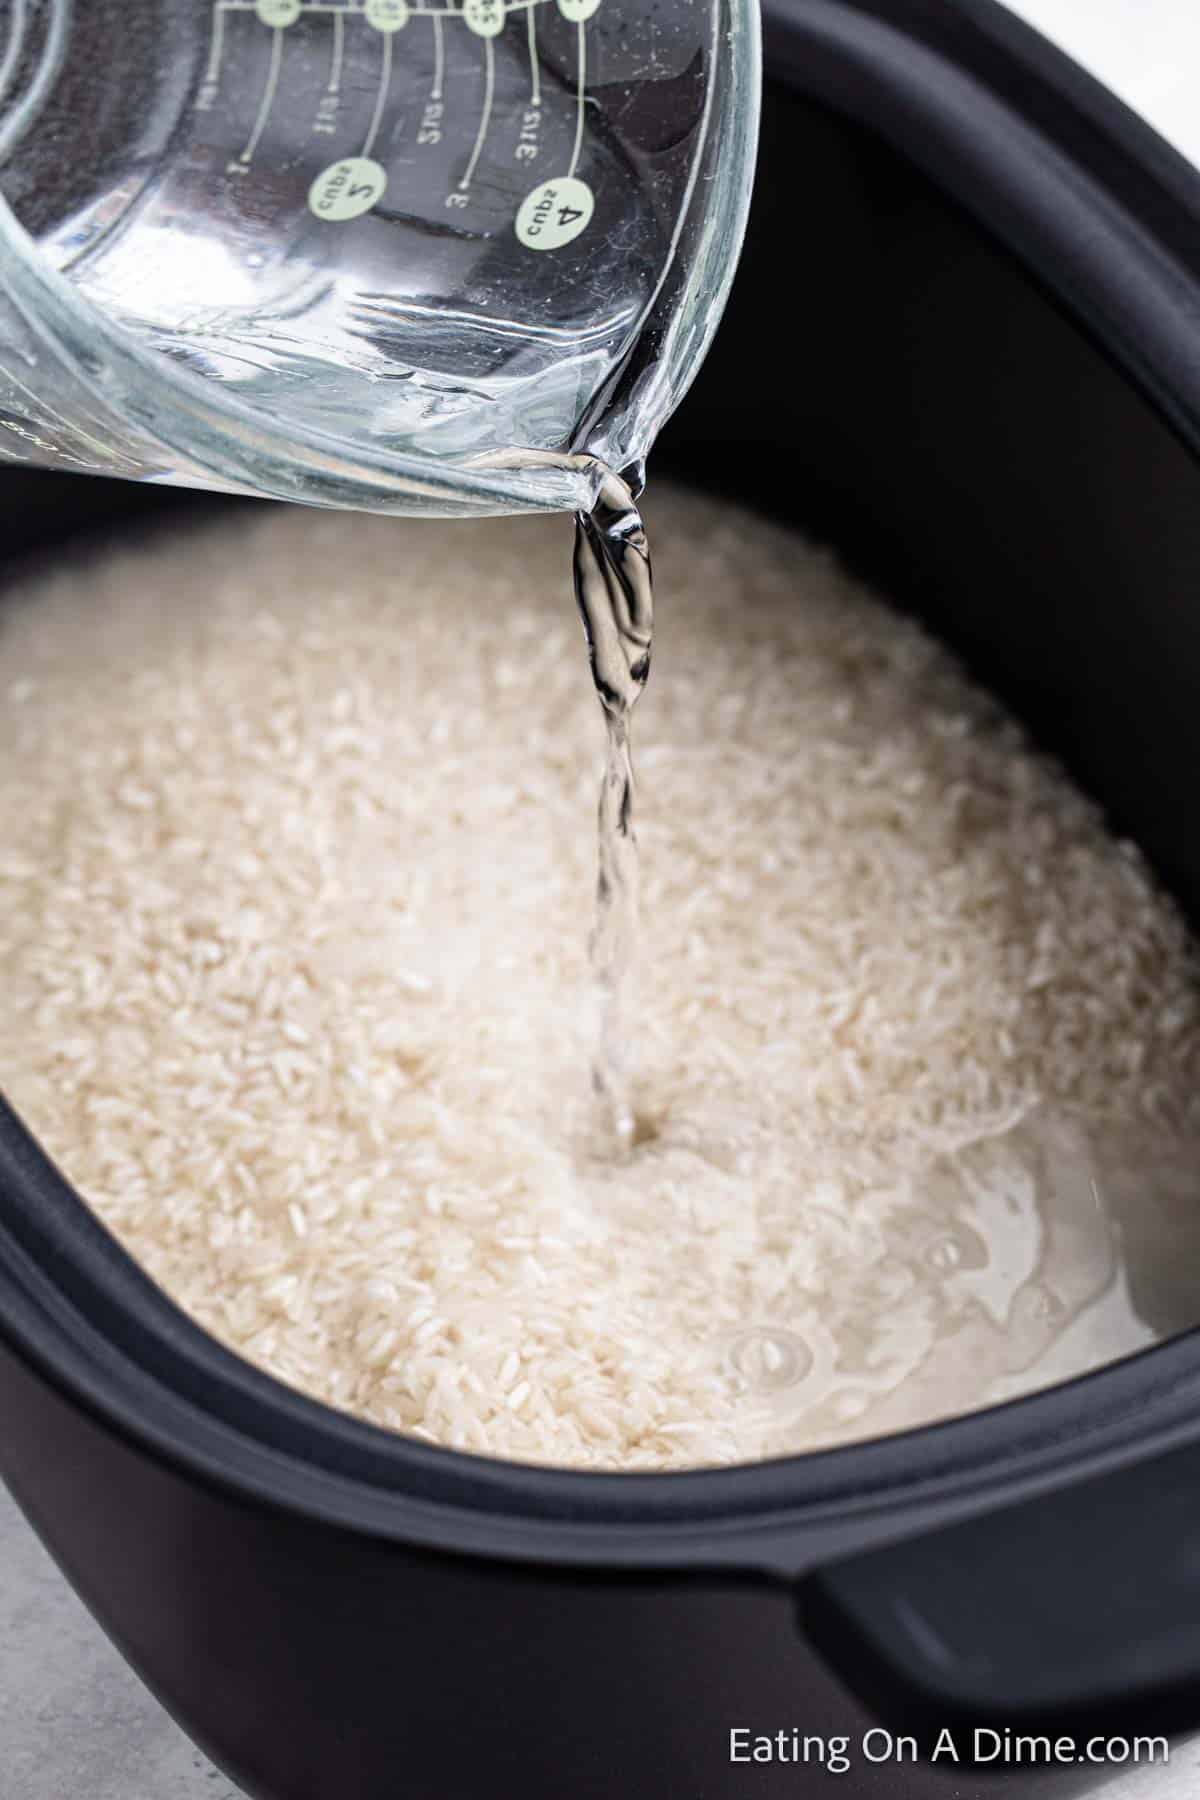 Pouring the water into the slow cooker on top of the white rice